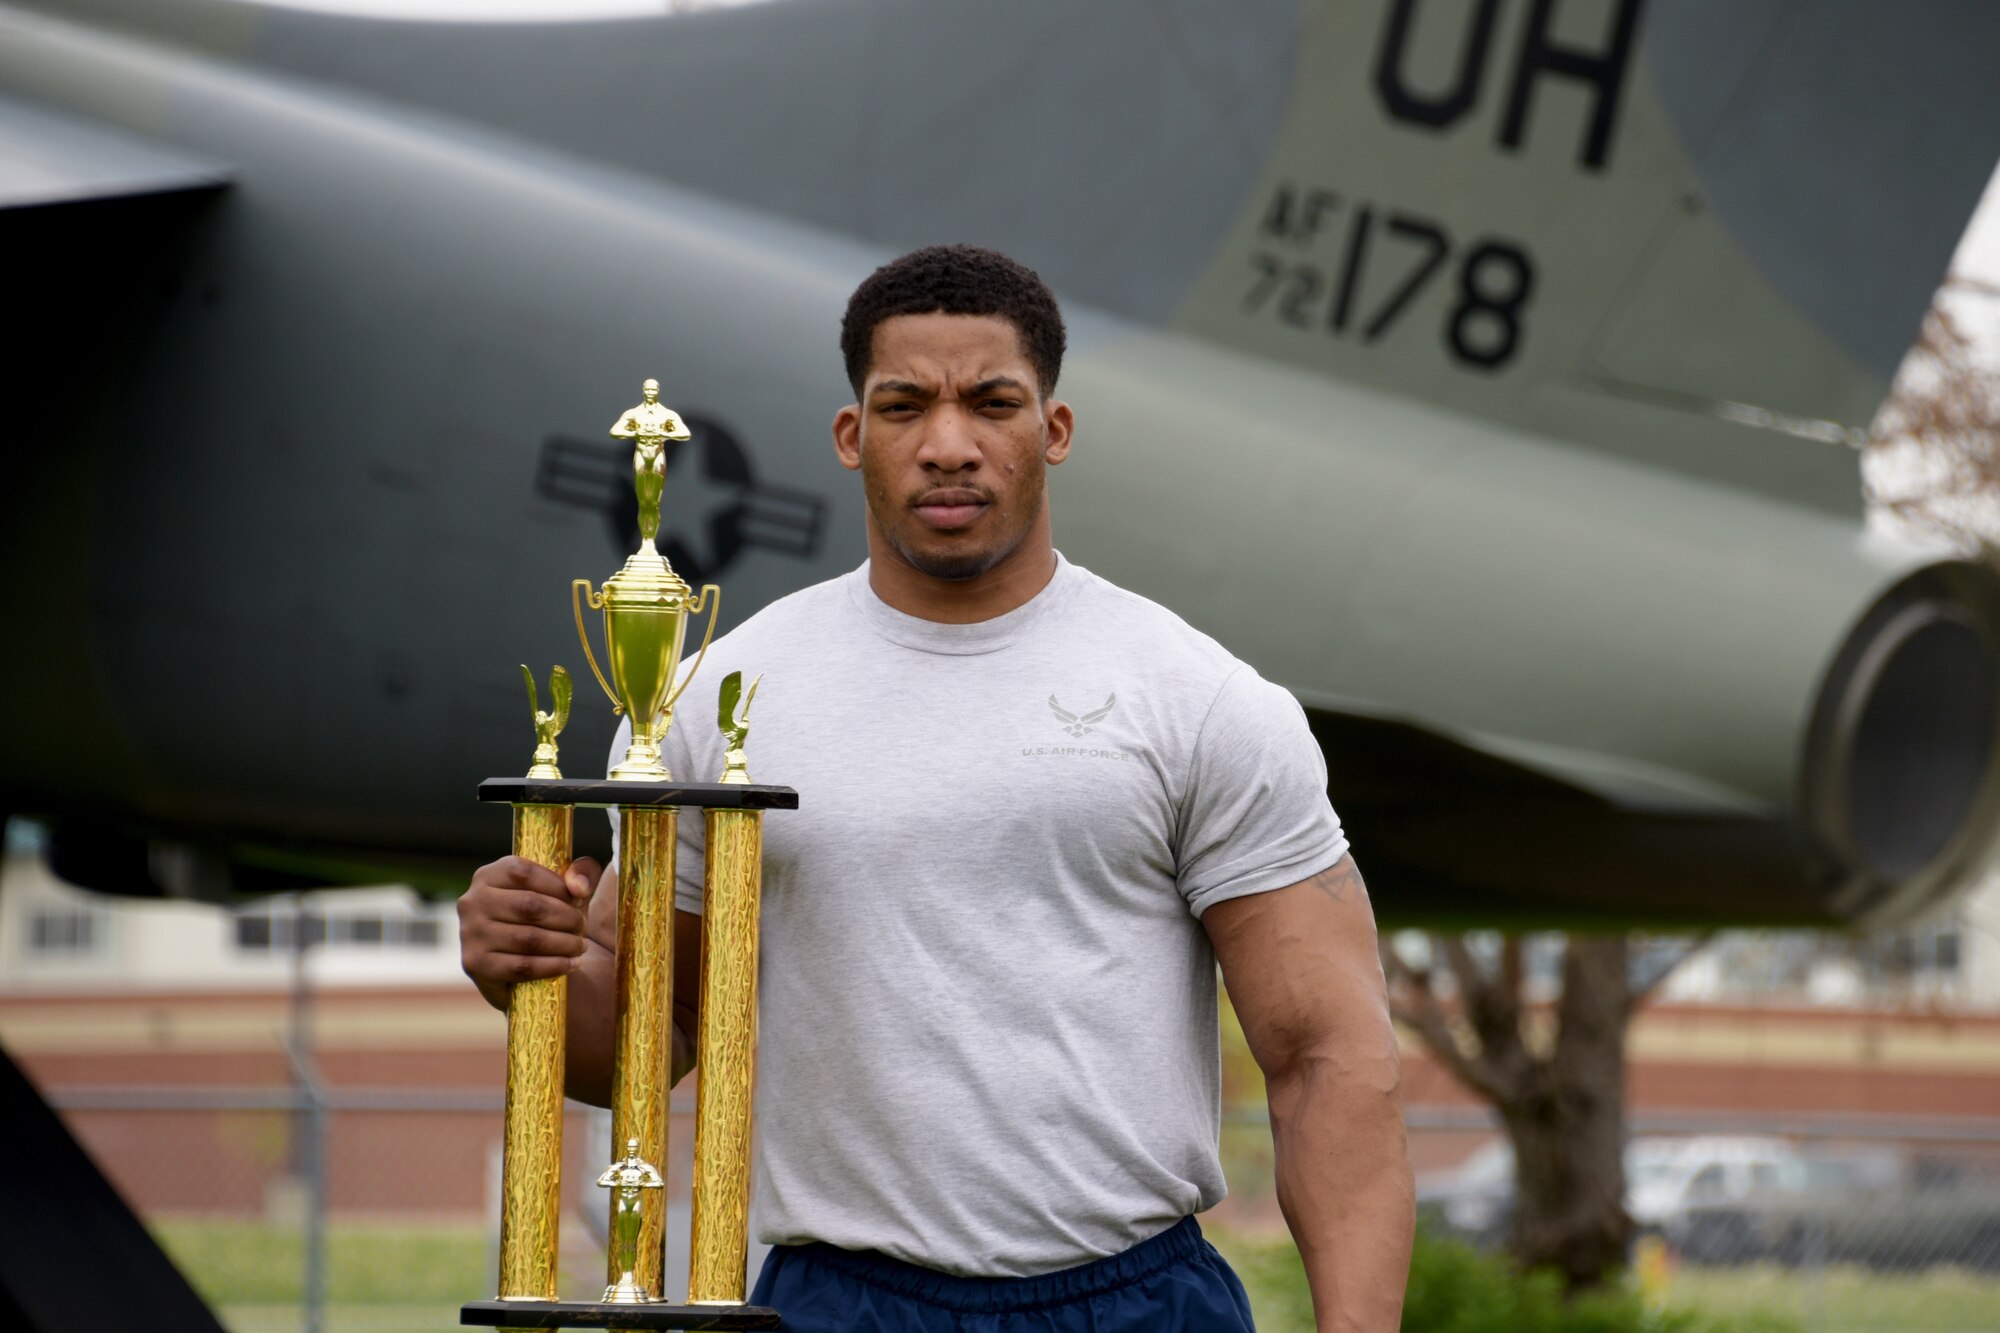 Senior Airman Ervin Anderson, an administrative specialist with the 251st Cyberspace Engineering Installation Group, exemplifies the Air Force core value of “excellence in all we do” through his impressive body building achievements.